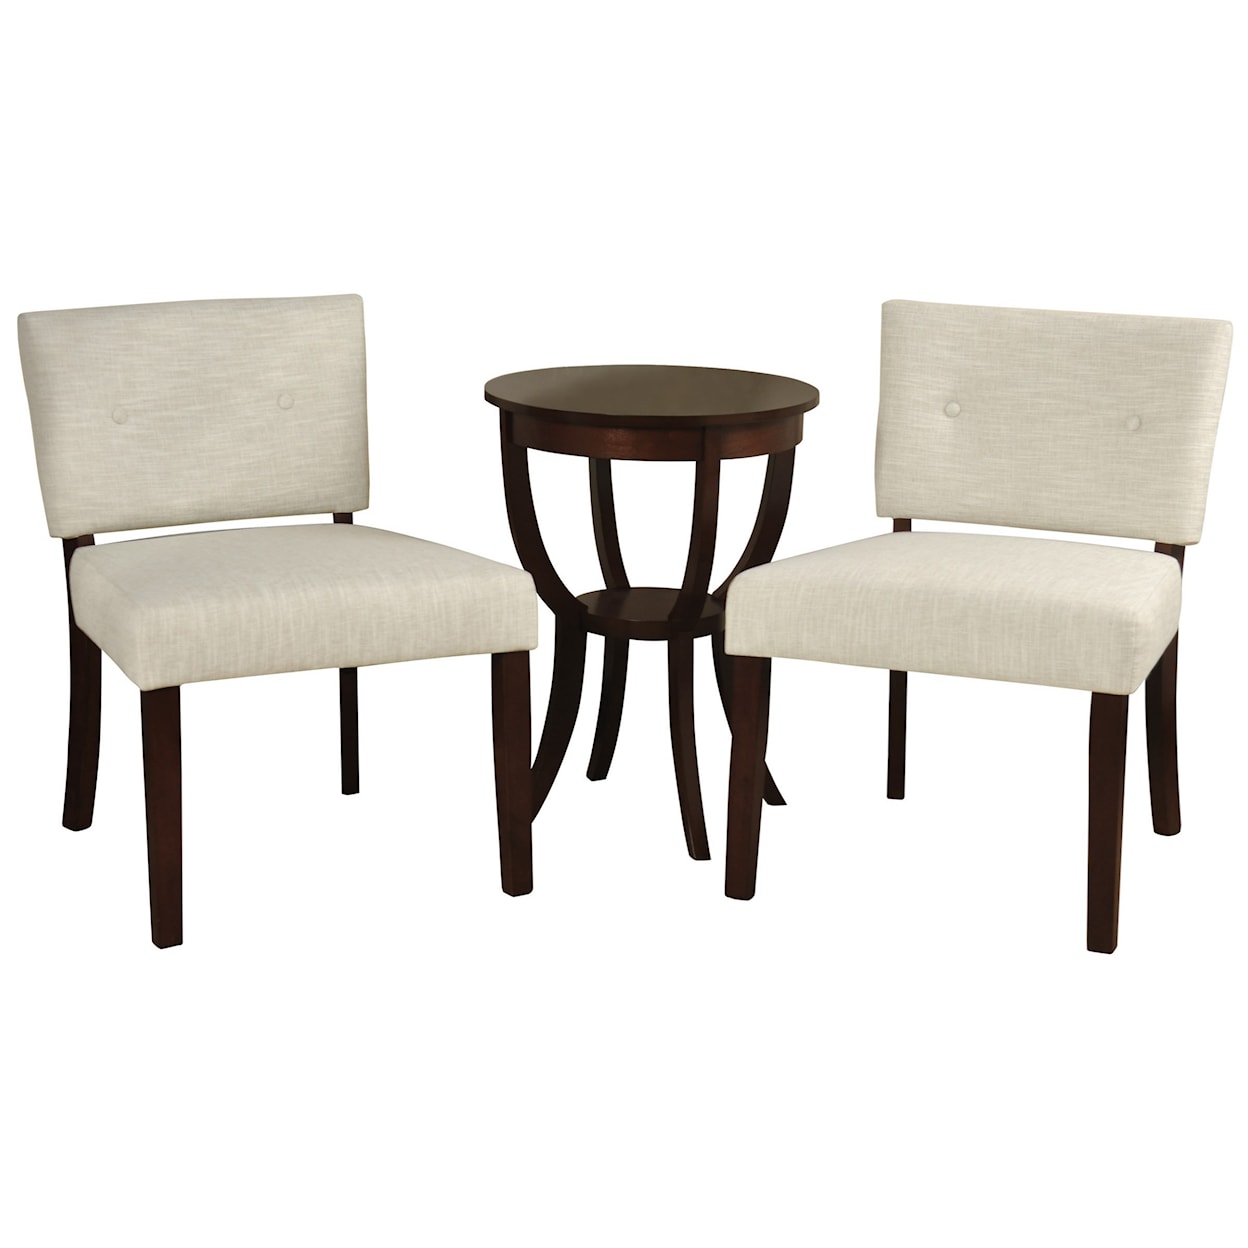 StyleCraft Table and Chair Sets 3 Piece Side Table and Chairs Set